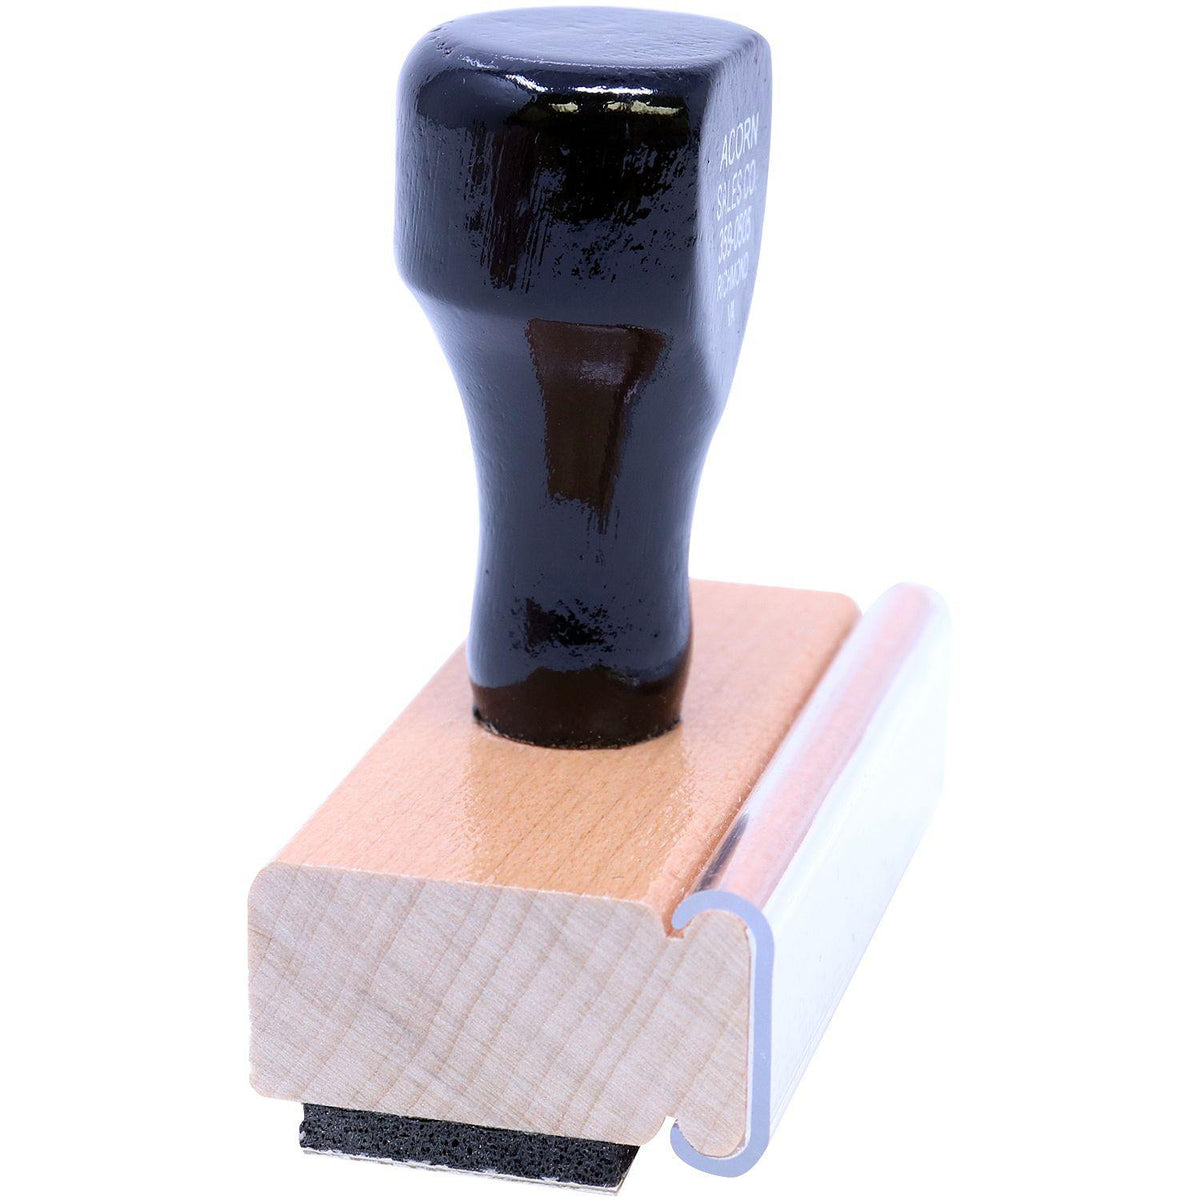 Side View of Completed Together In Class Rubber Stamp at an Angle